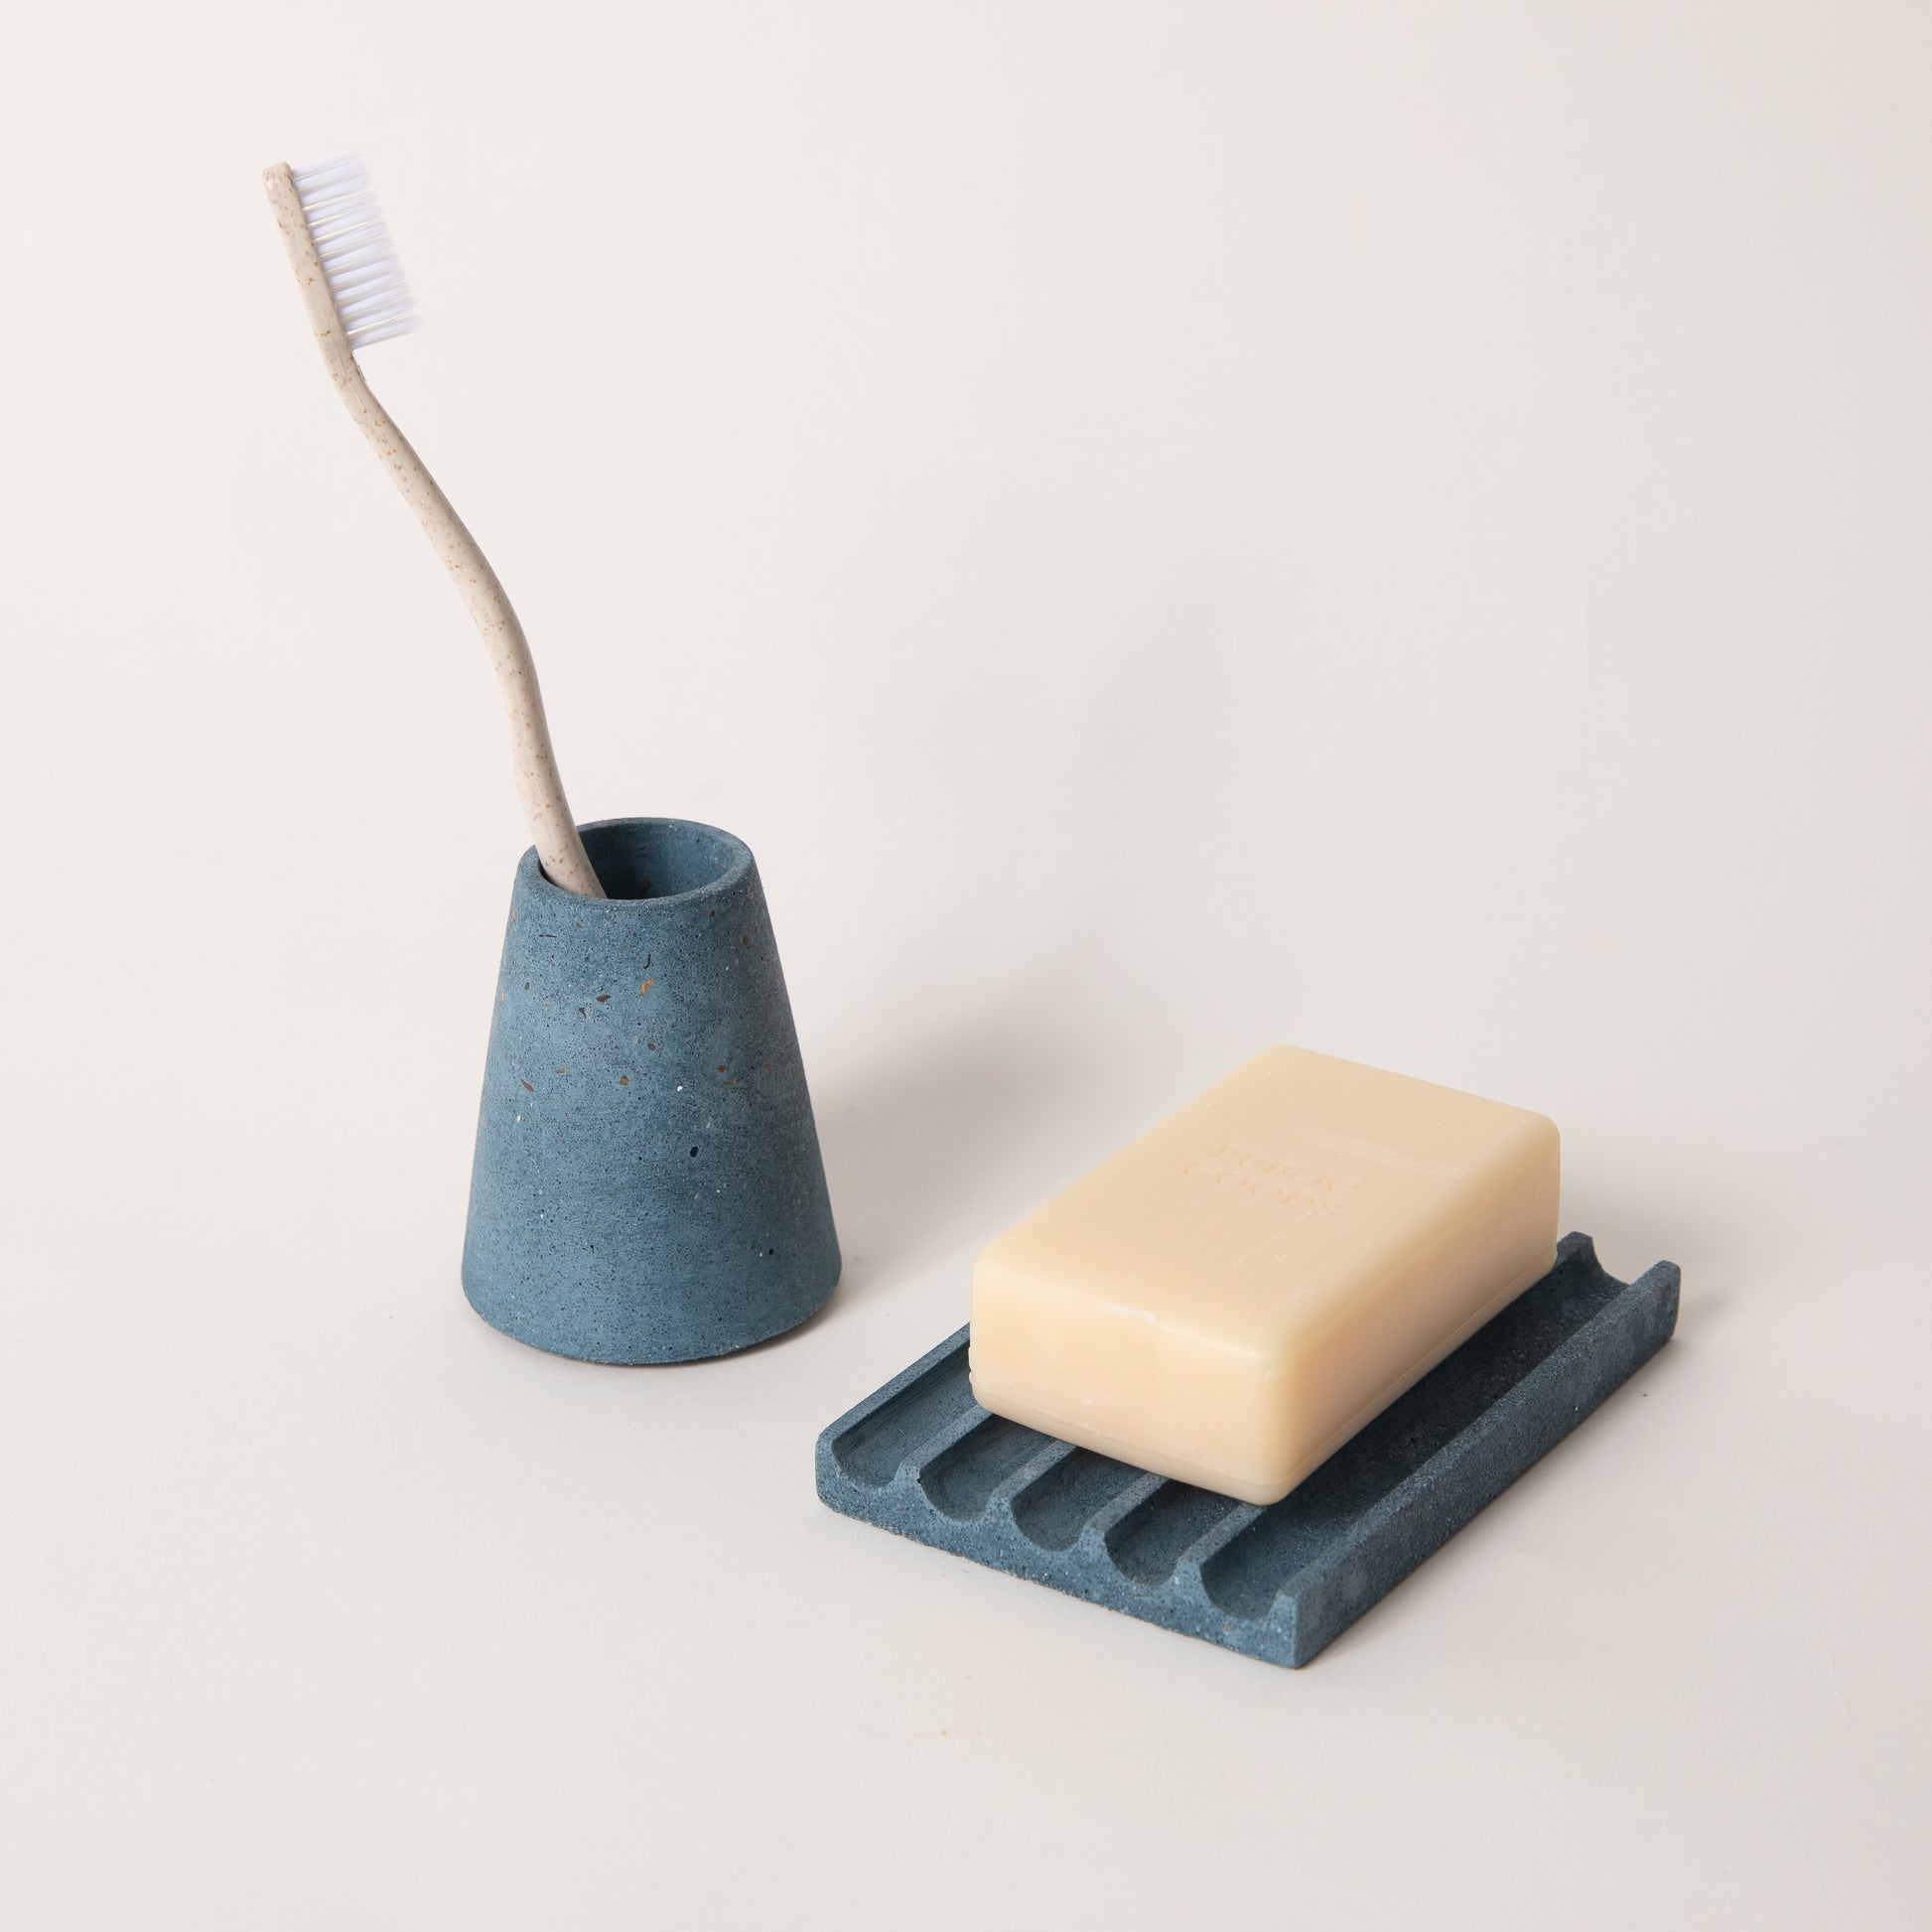 Cobalt terrazzo toothbrush holder & soap dish set, styled with a toothbrush & bar of soap.